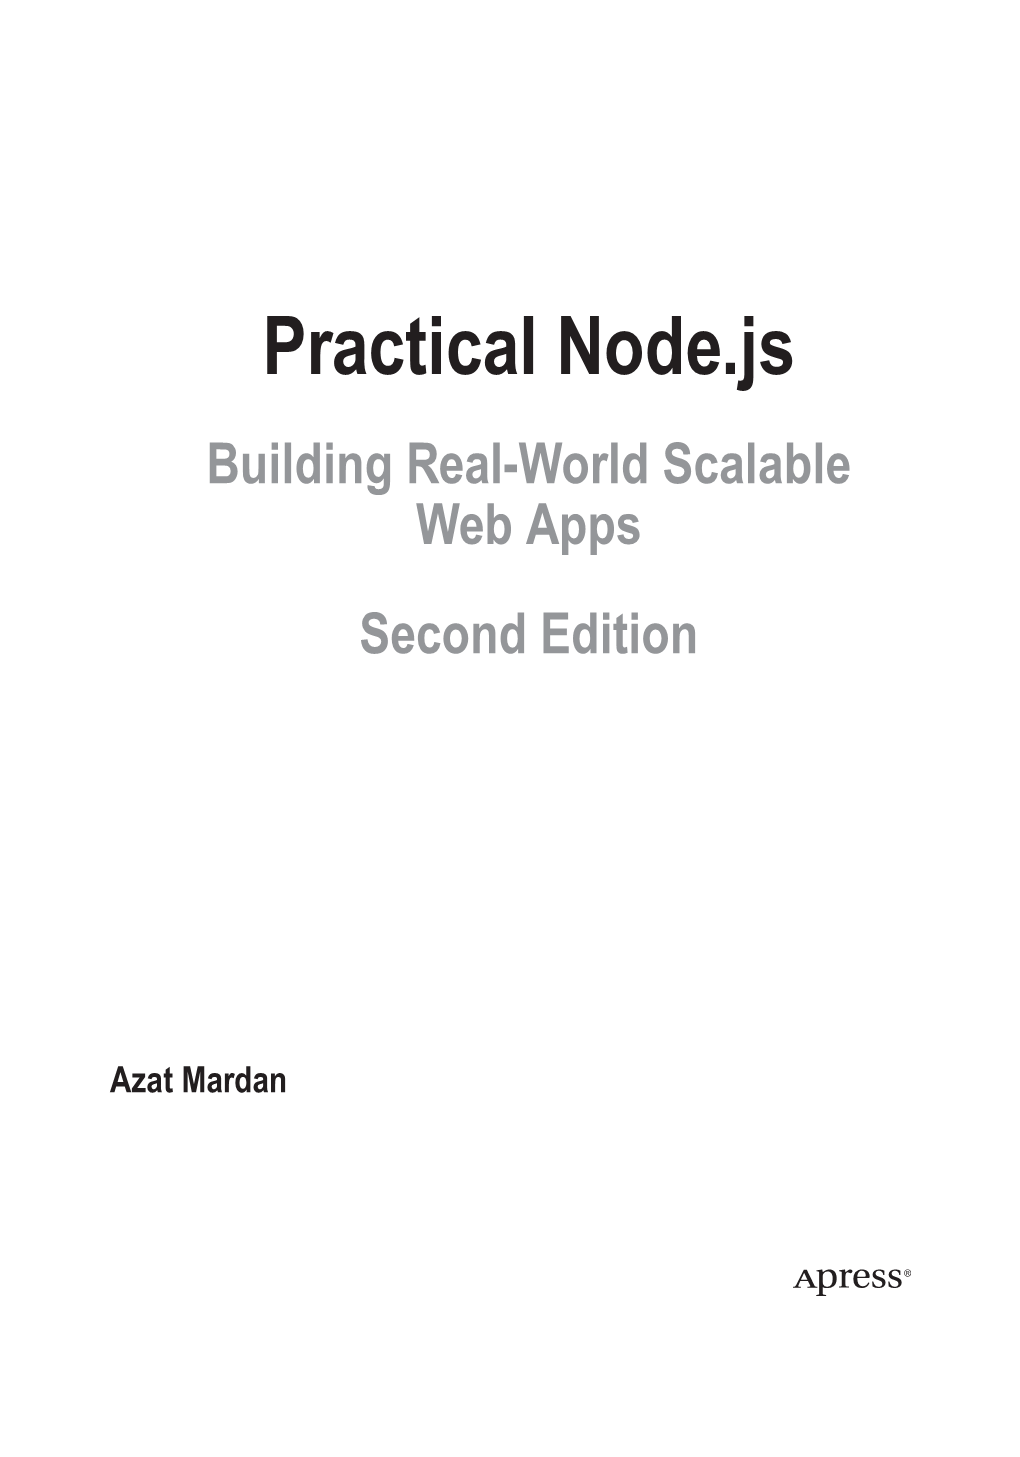 Practical Node.Js Building Real-World Scalable Web Apps Second Edition